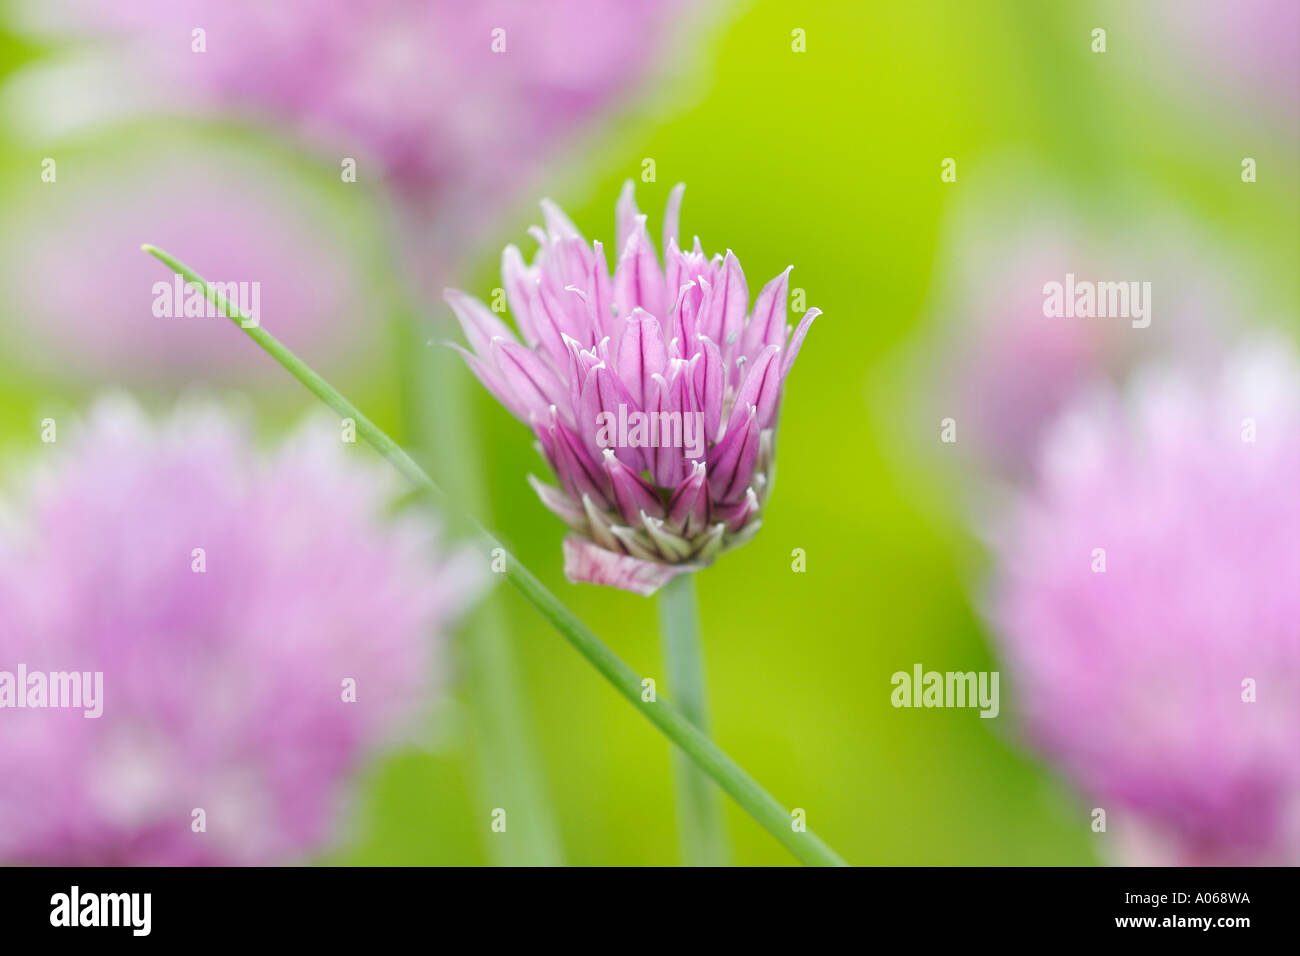 Close up of a pink chive flower Stock Photo